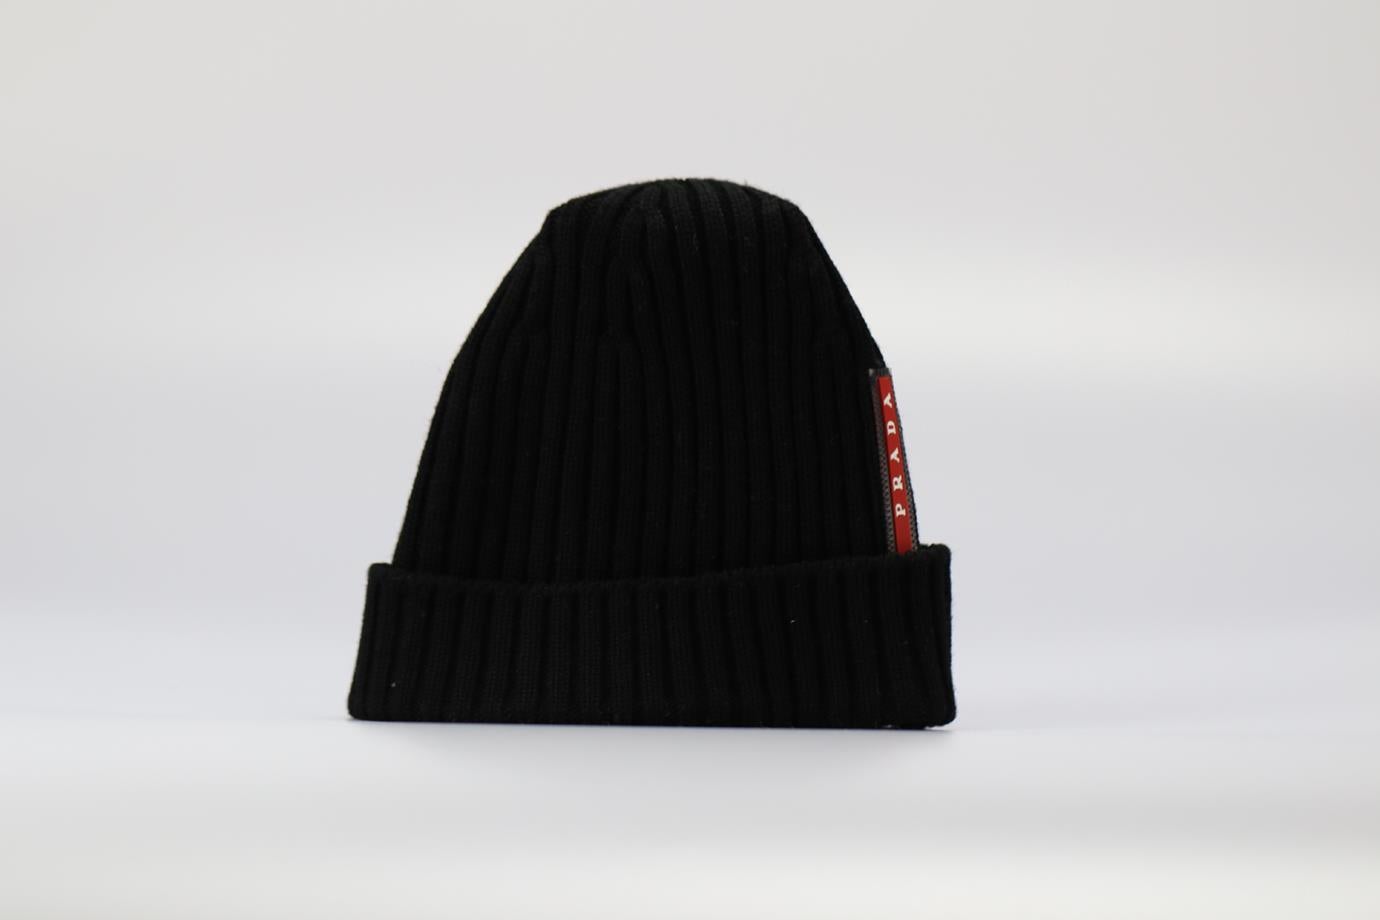 Prada Logo Detailed Ribbed Wool Beanie. Black. Pull on. Does not come with - dustbag or box. 100% Virgin wool. Medium. Circumference: 19 in. Condition: Used. Very good condition - No sign of wear; see pictures
